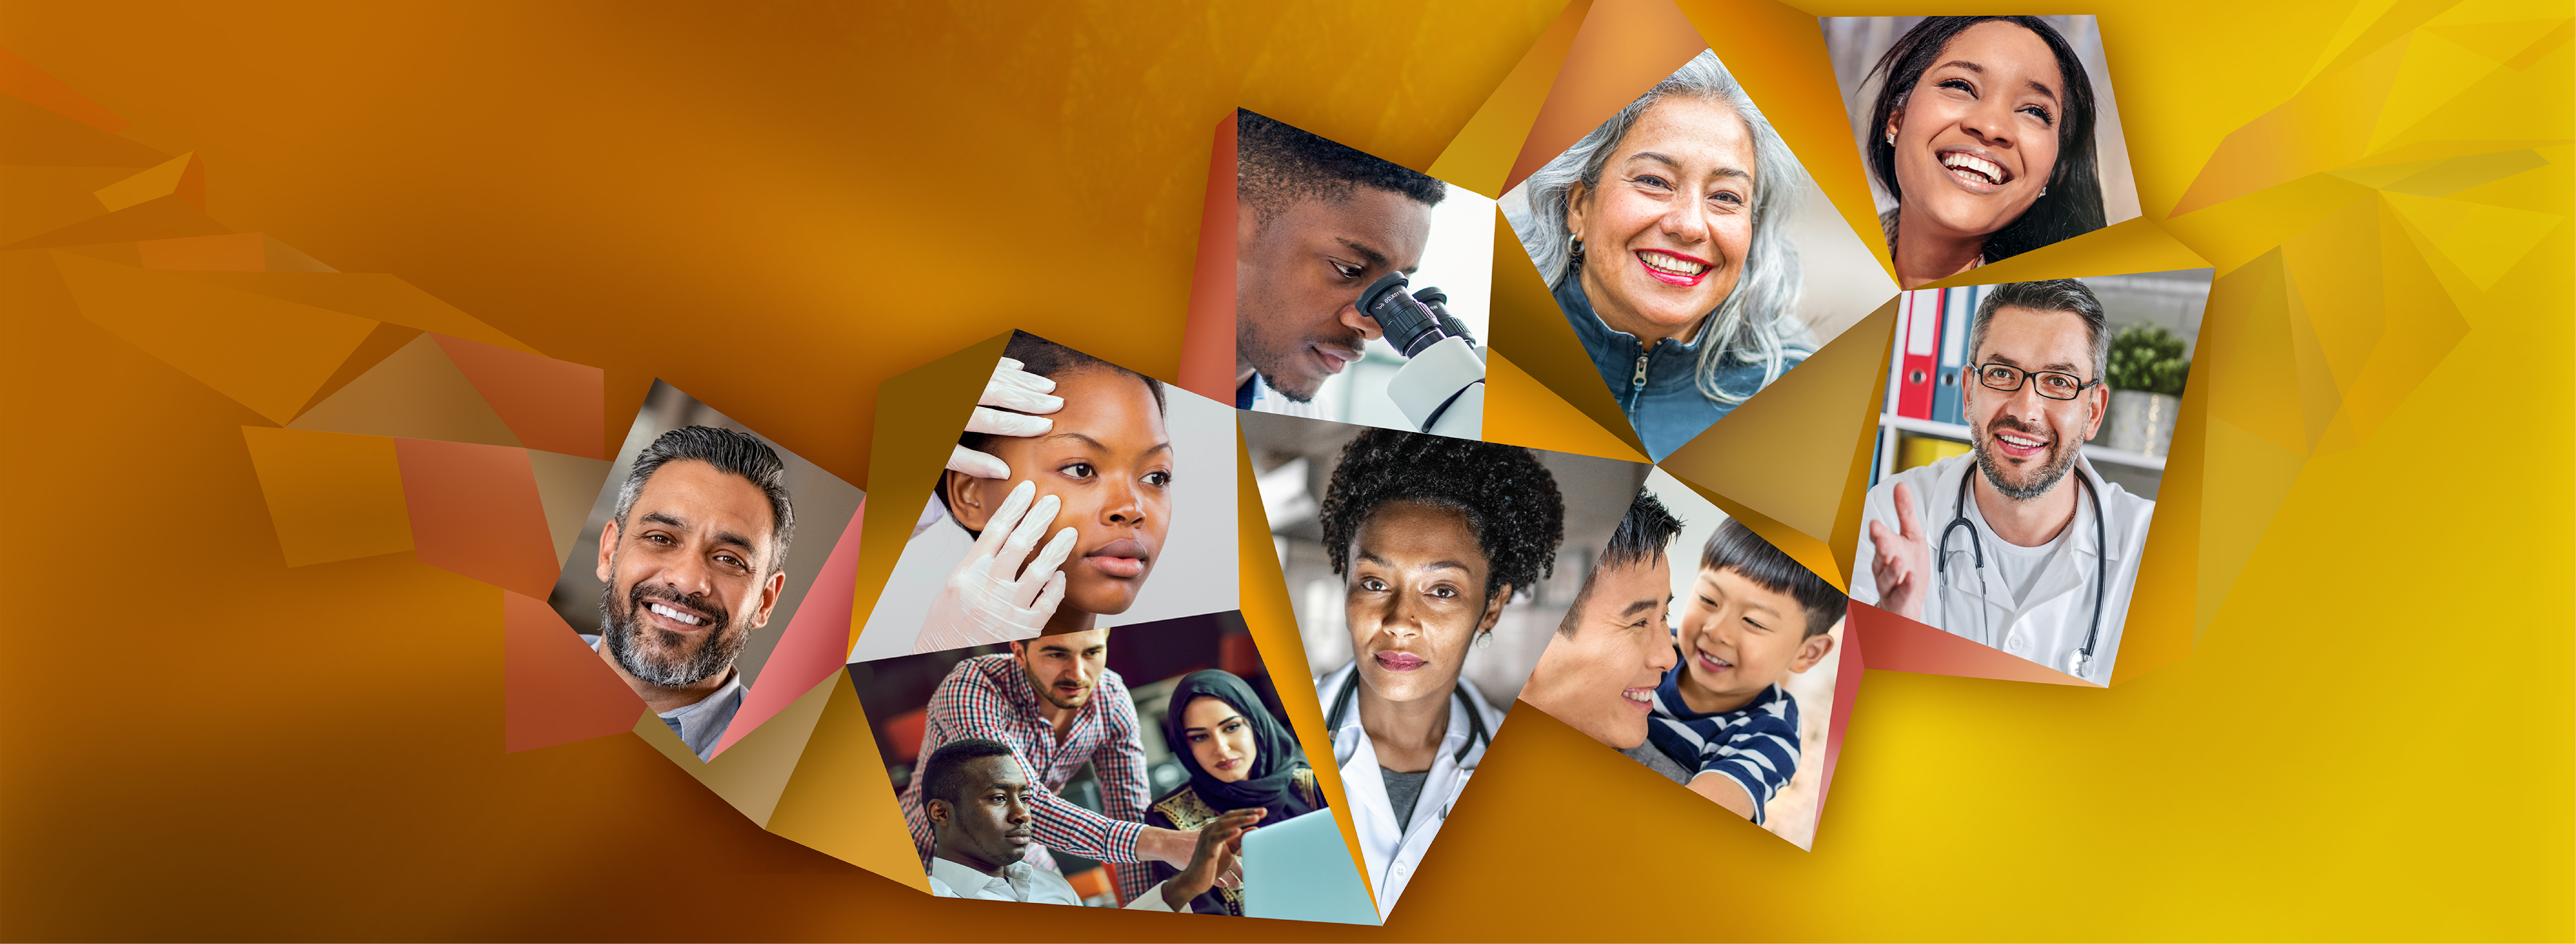 17th Annual Skin of Color Society Scientific Symposium-banner-image